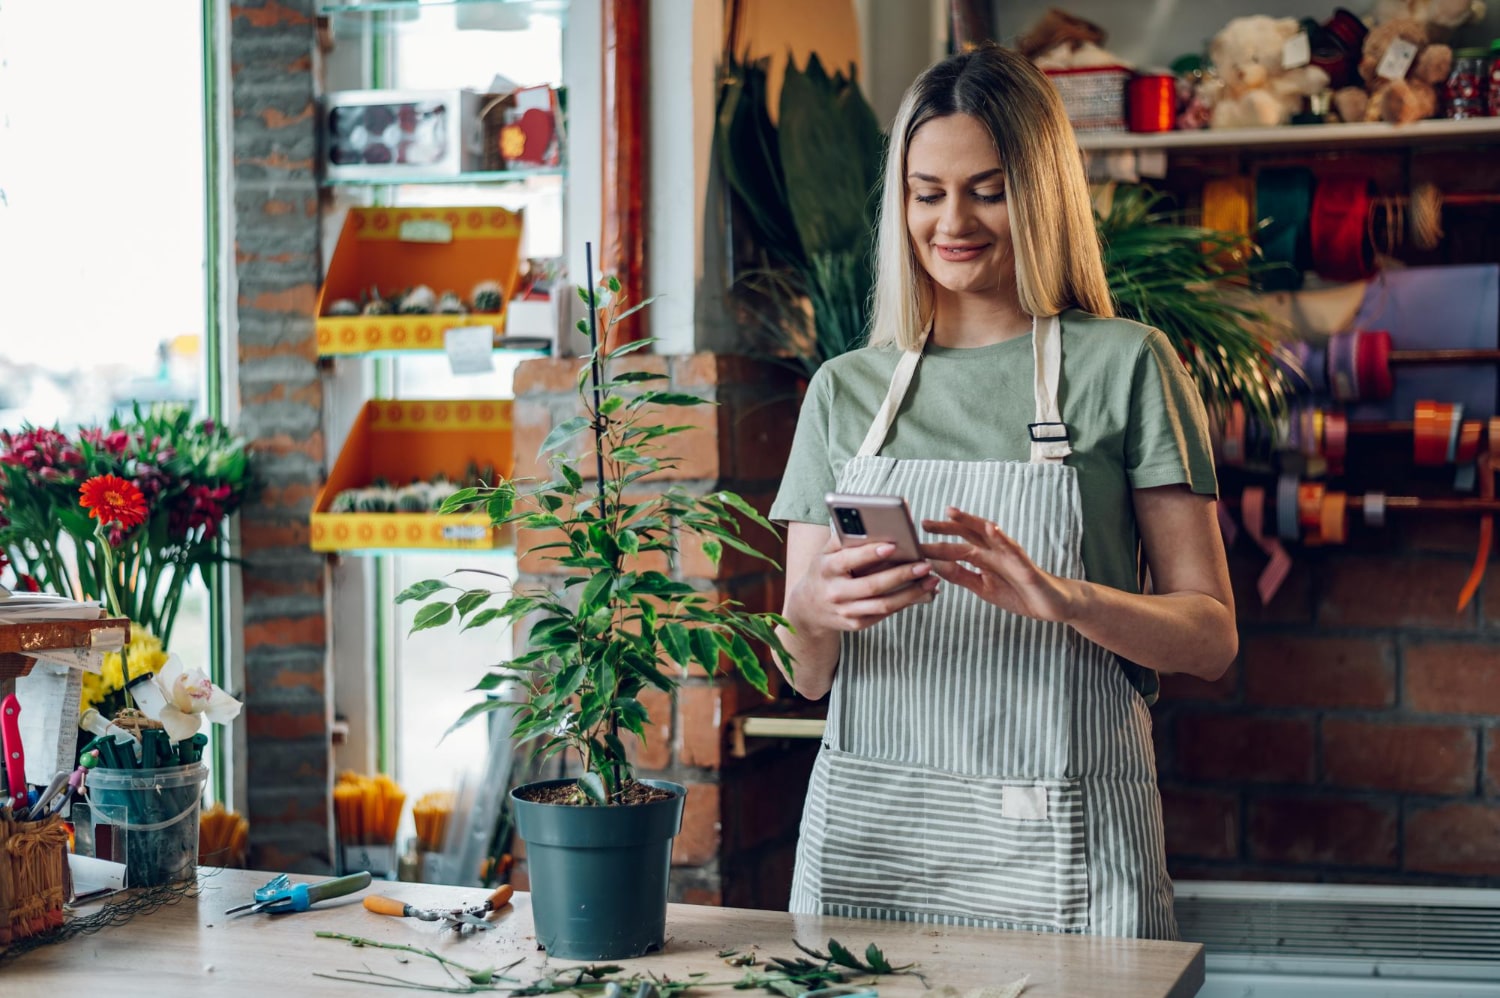 The Role of Mobile Technology in Small Businesses